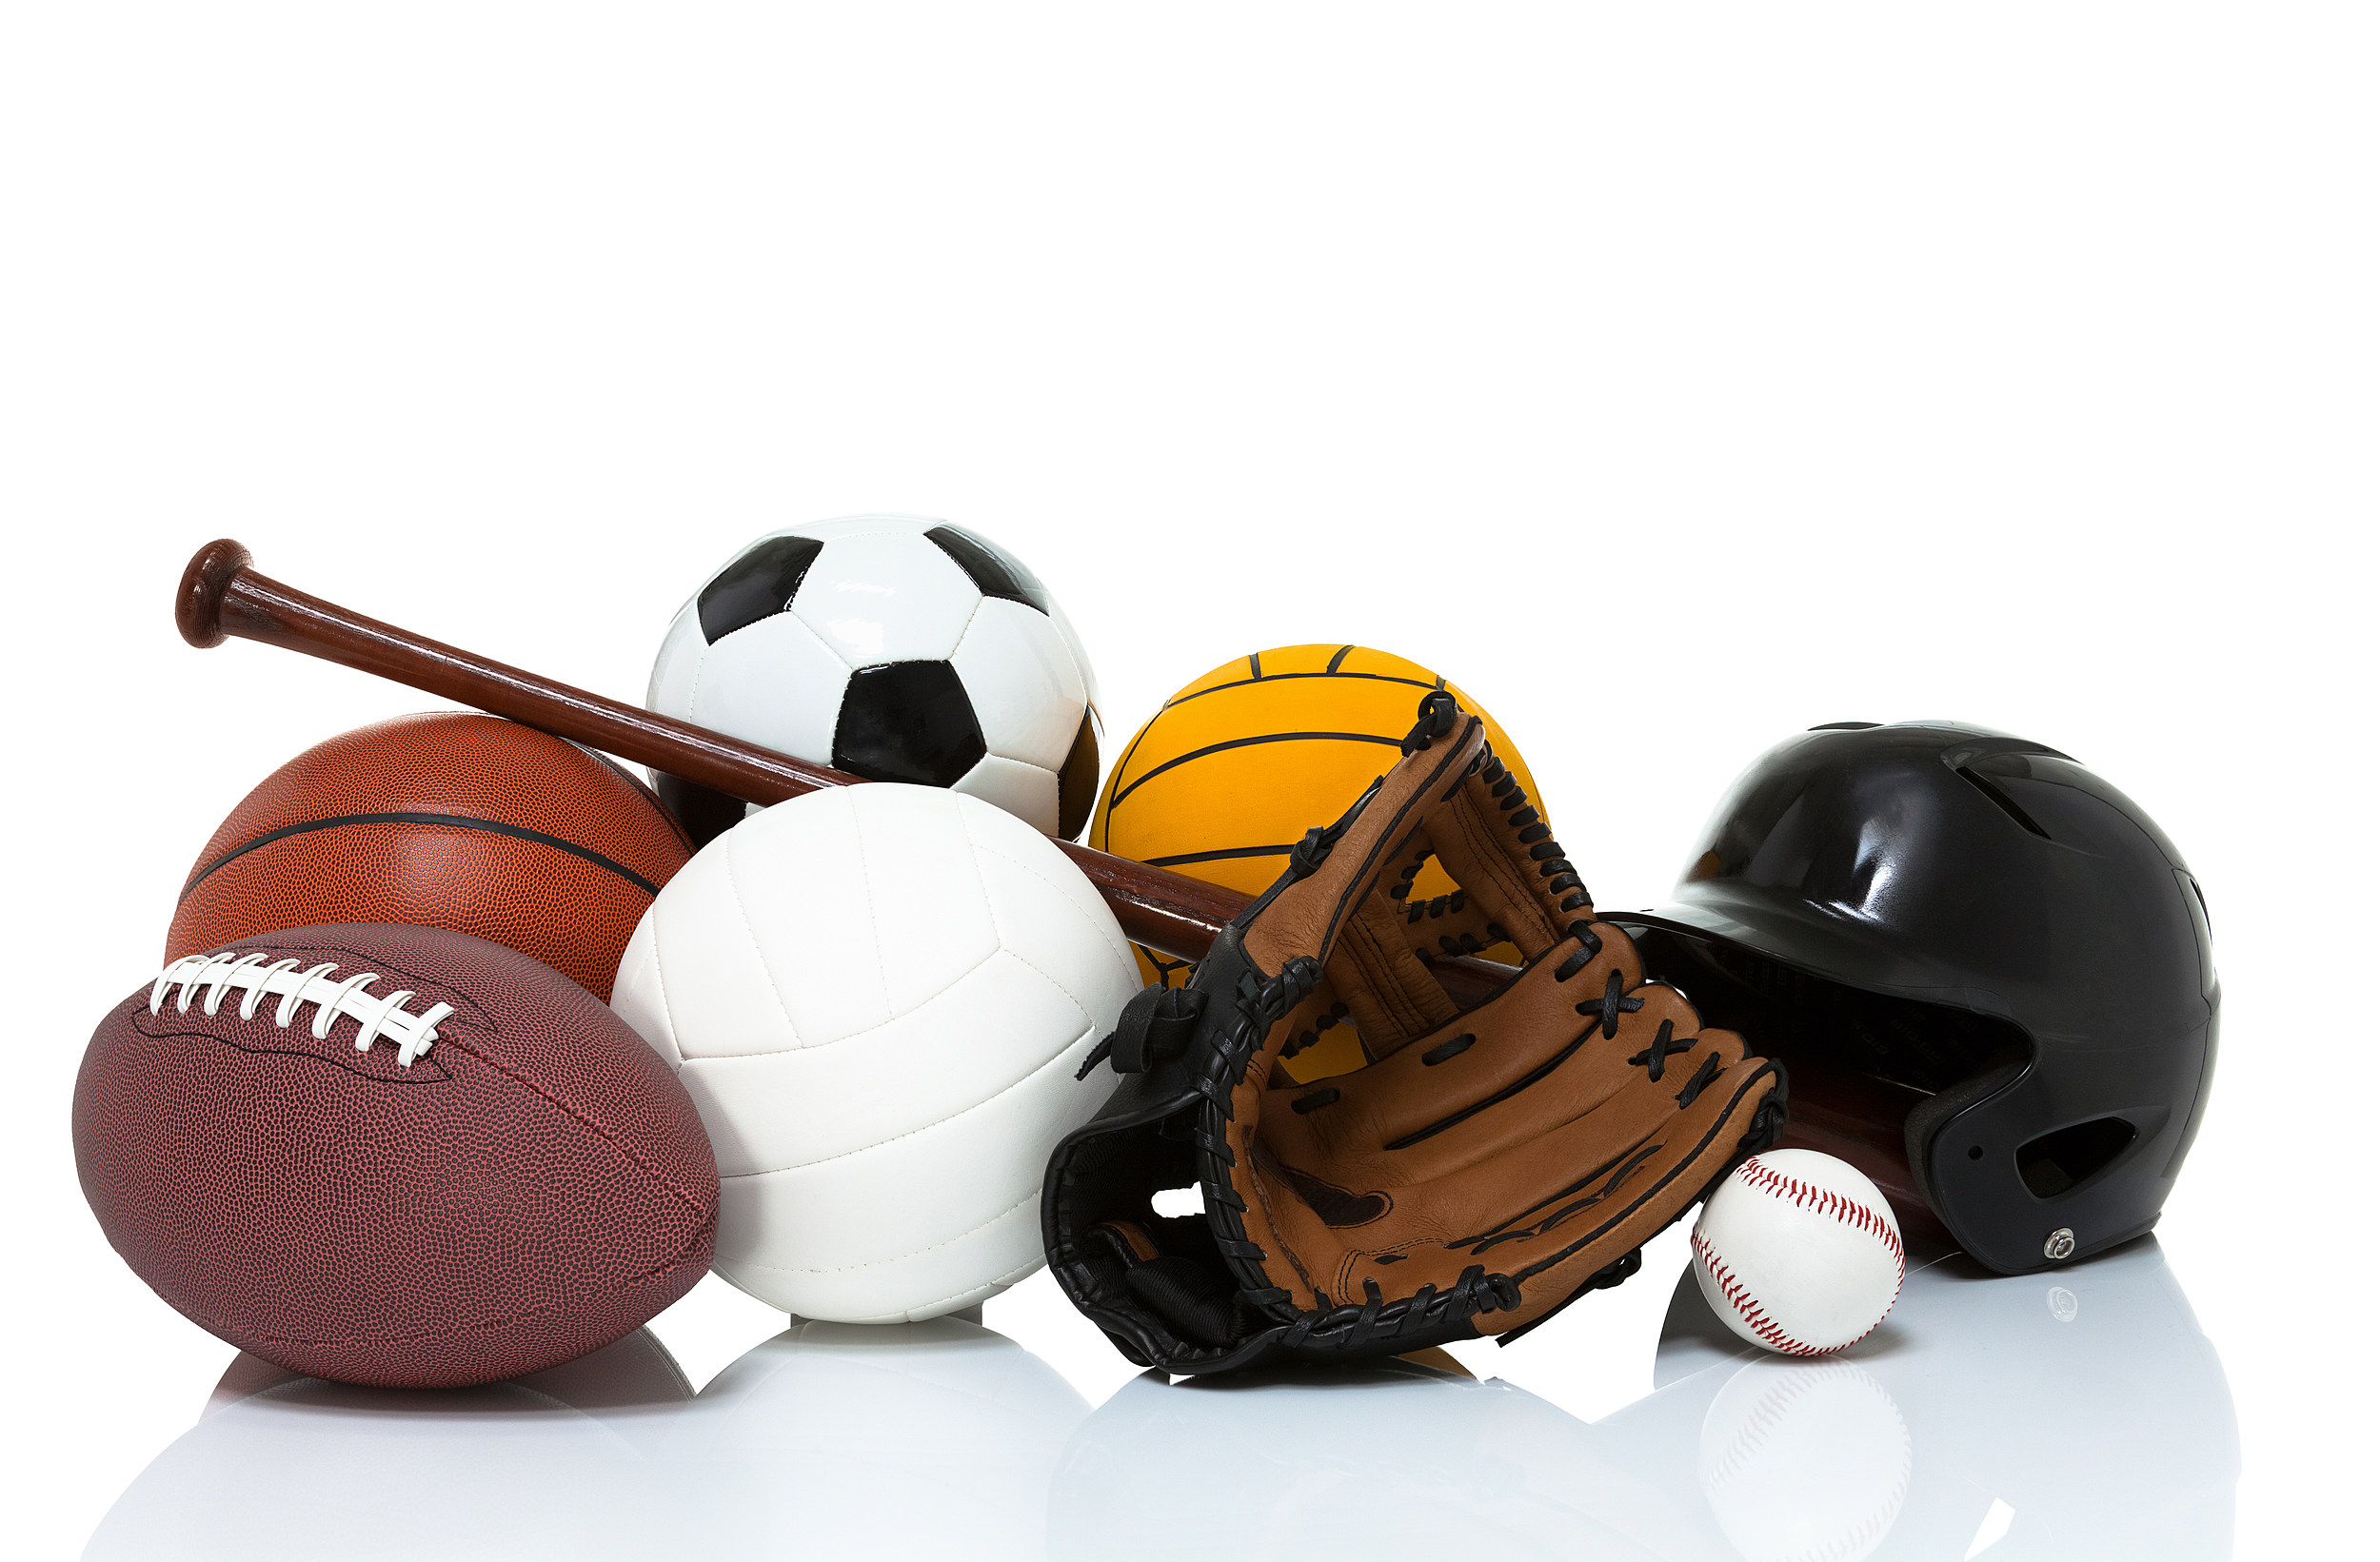 Free sports equipment offers